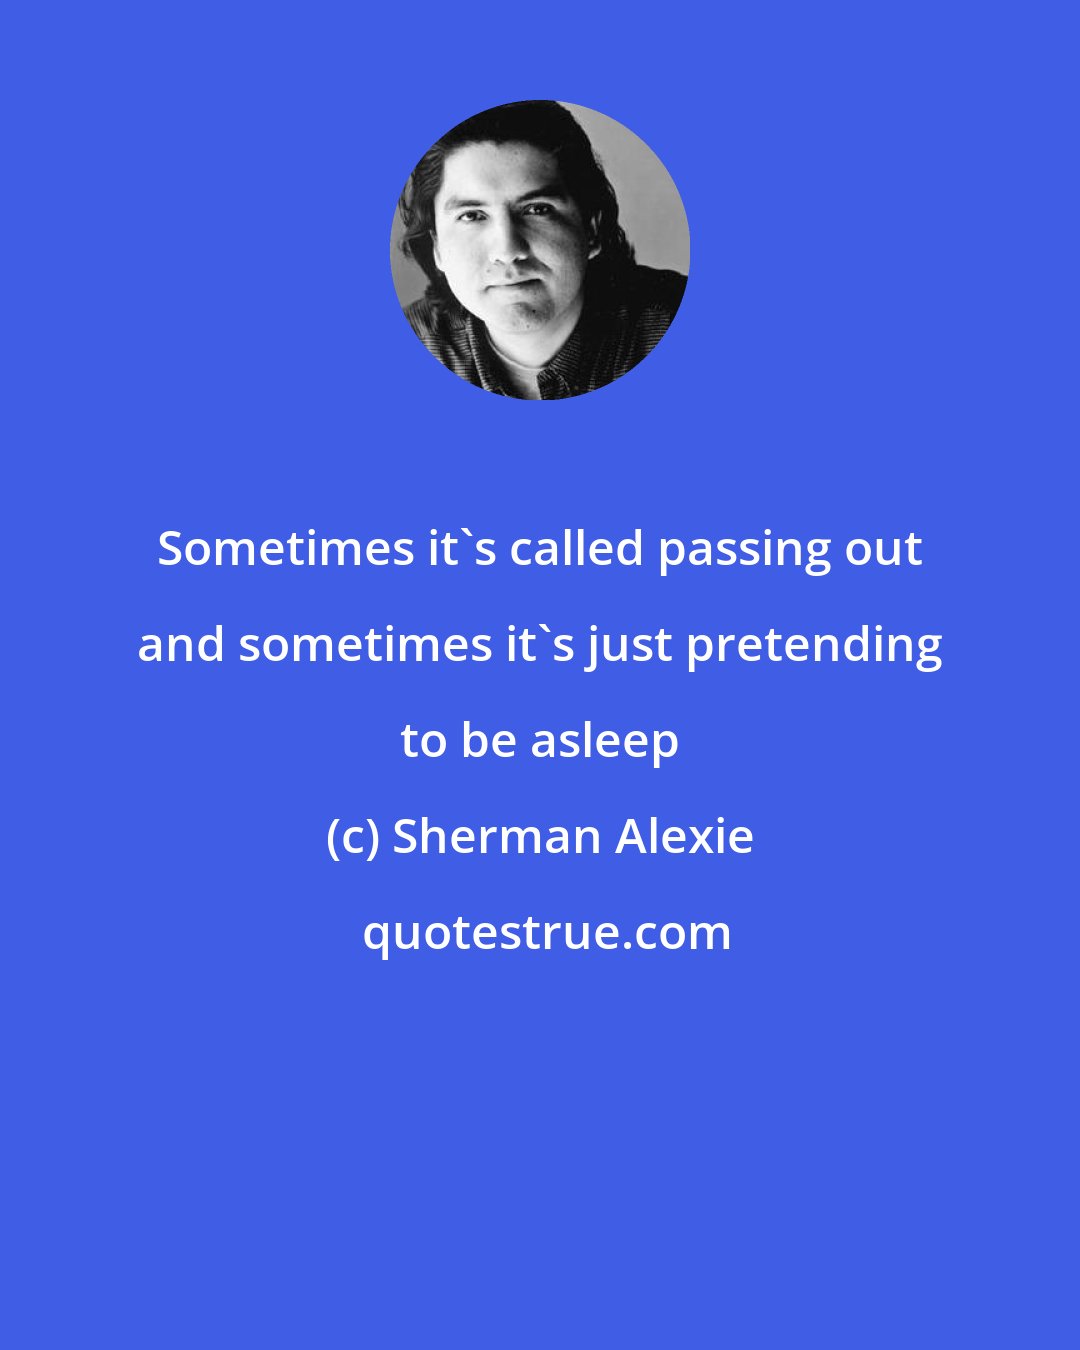 Sherman Alexie: Sometimes it's called passing out and sometimes it's just pretending to be asleep